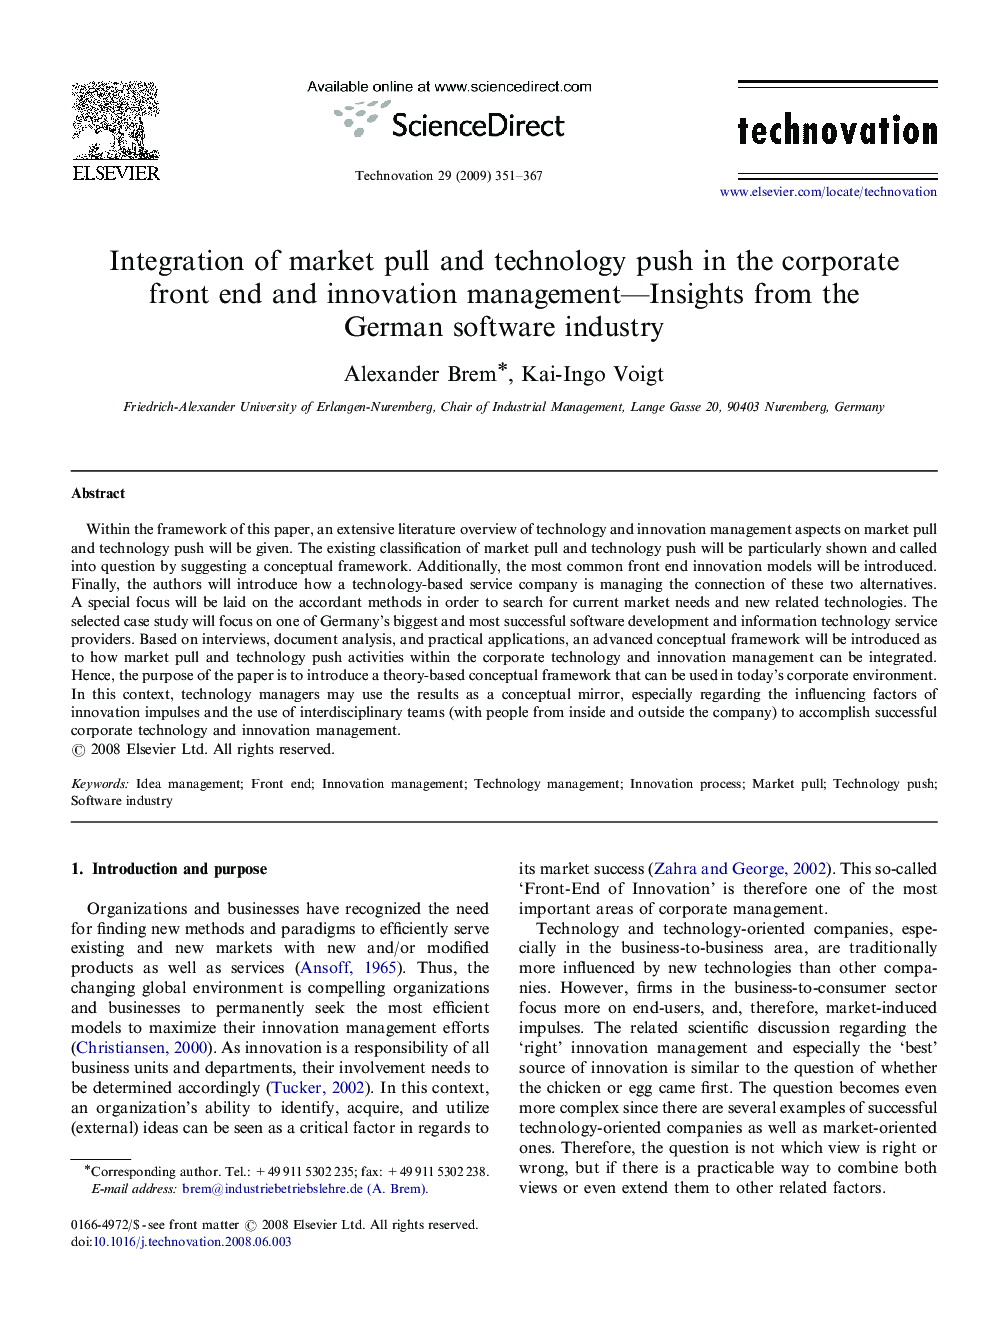 Integration of market pull and technology push in the corporate front end and innovation management—Insights from the German software industry